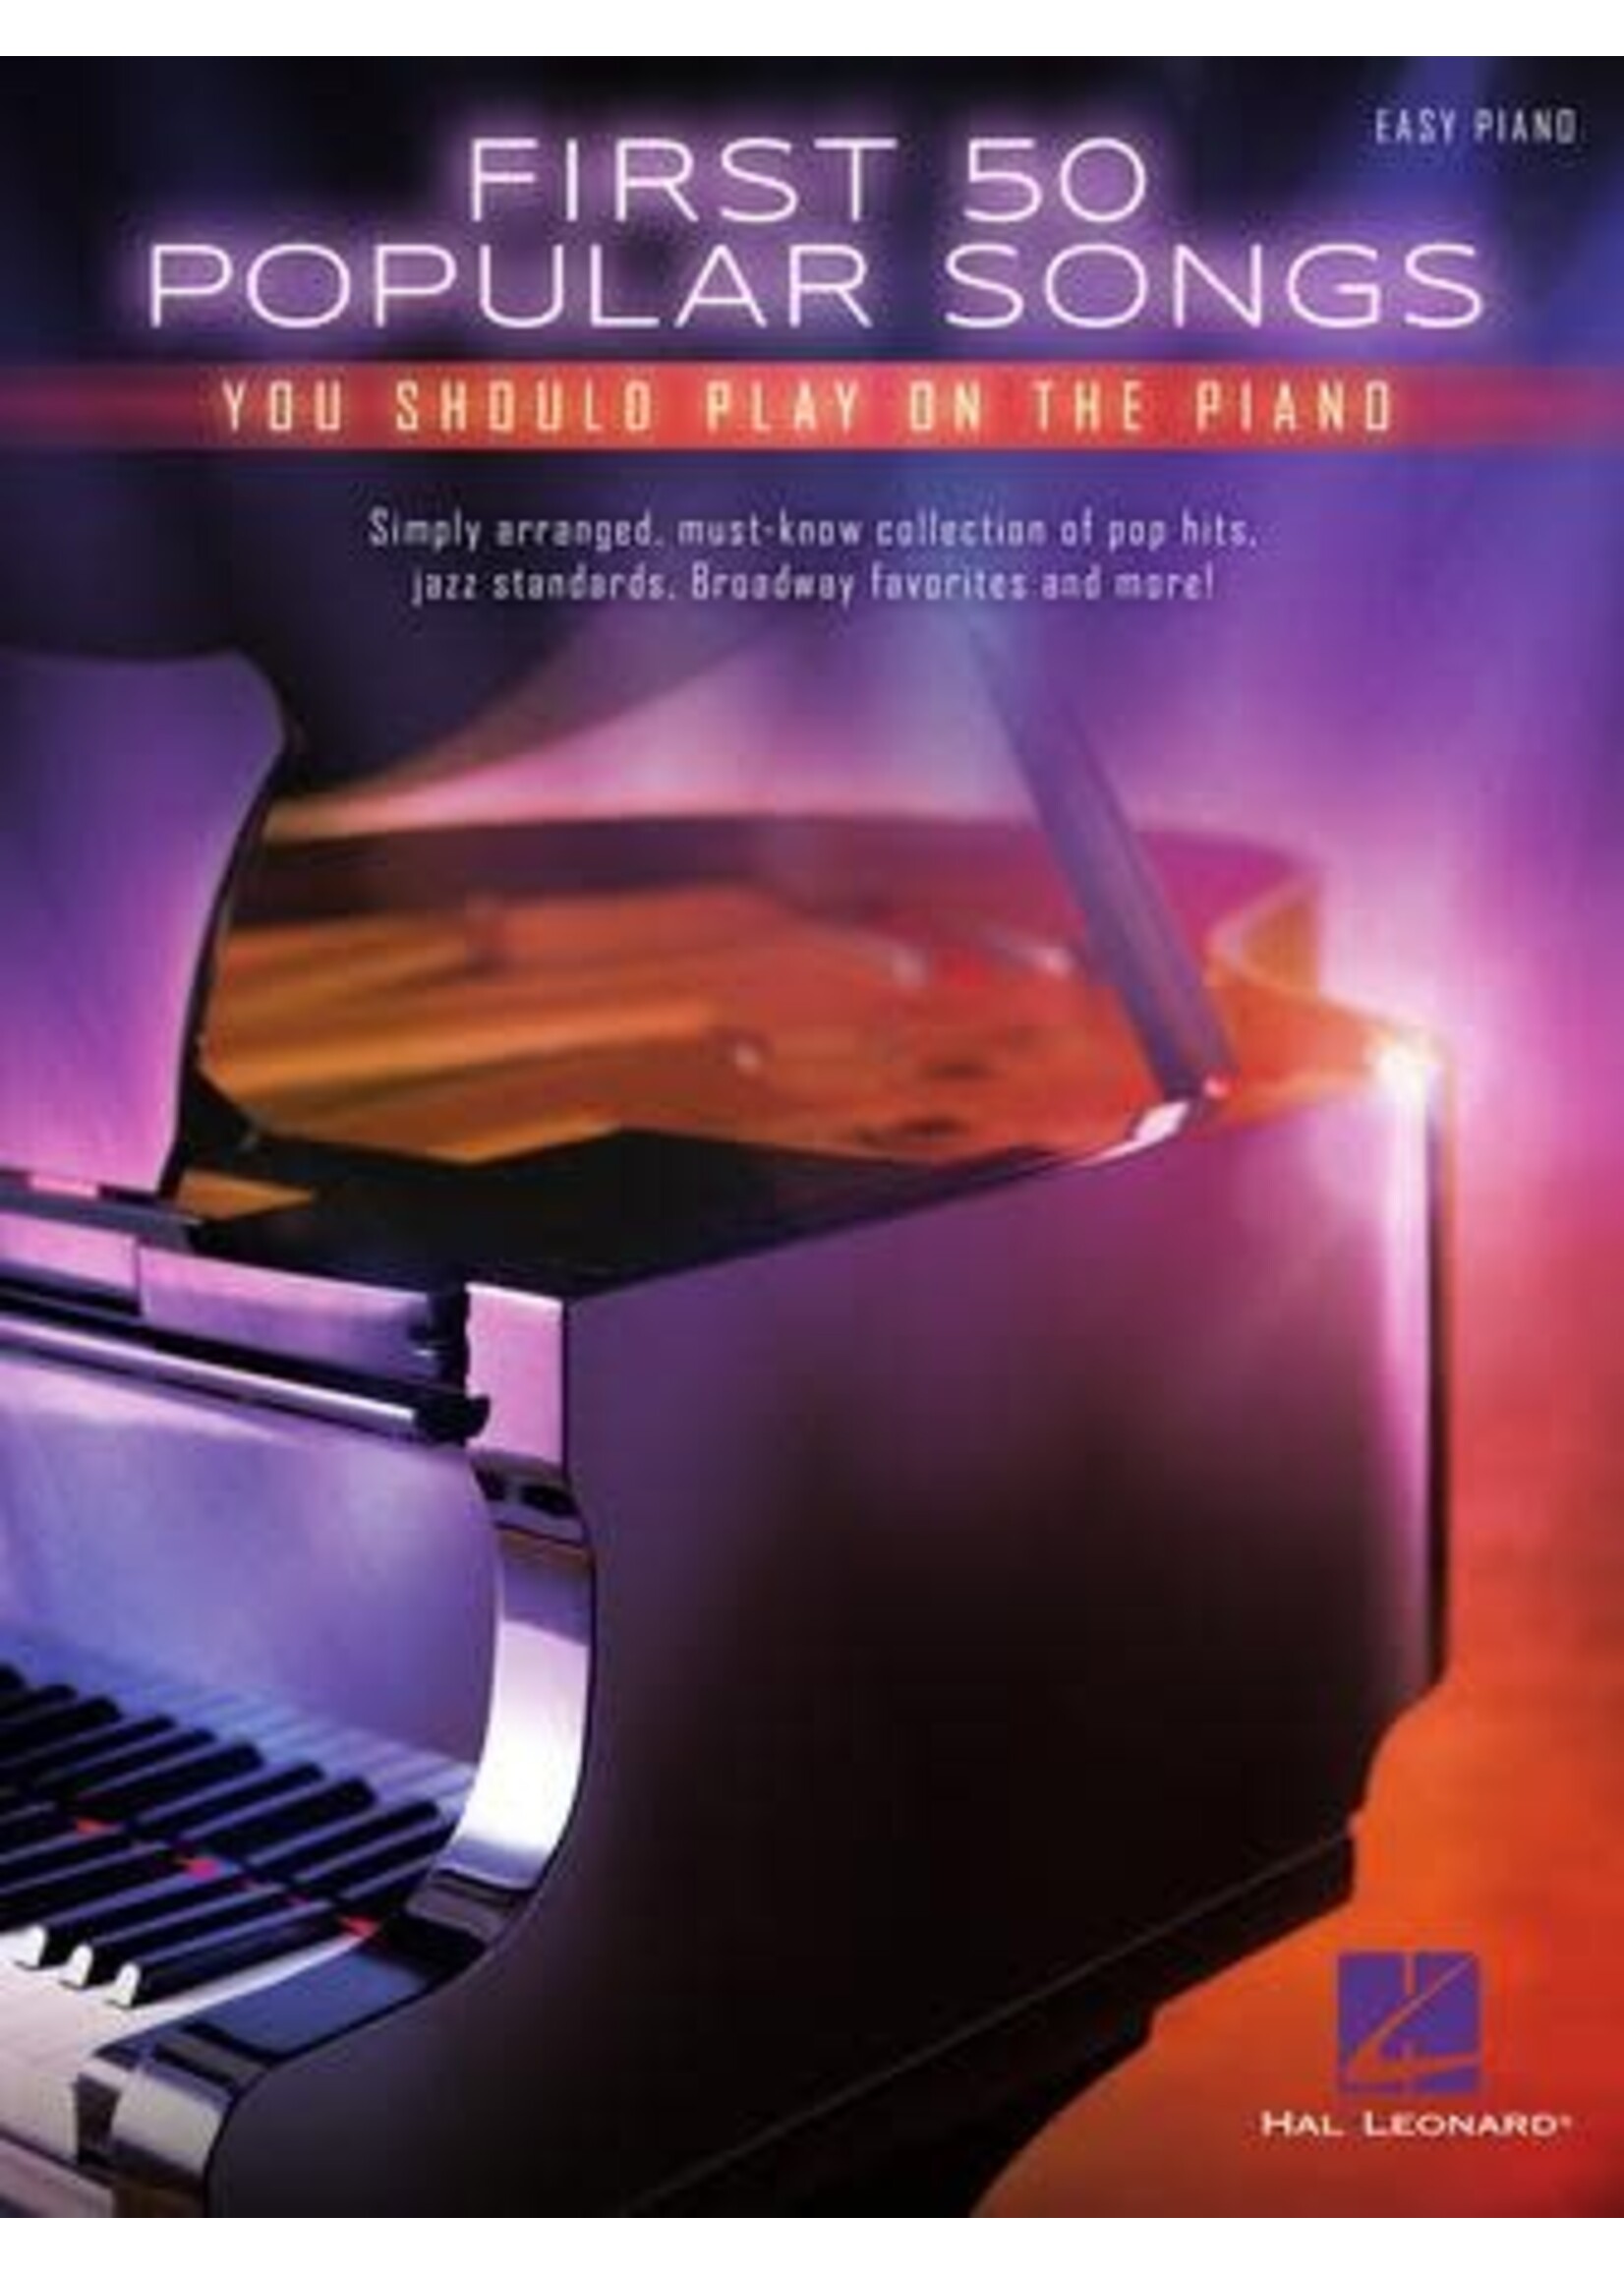 Hal Leonard First 50 Popular Songs You Should Play on the Piano